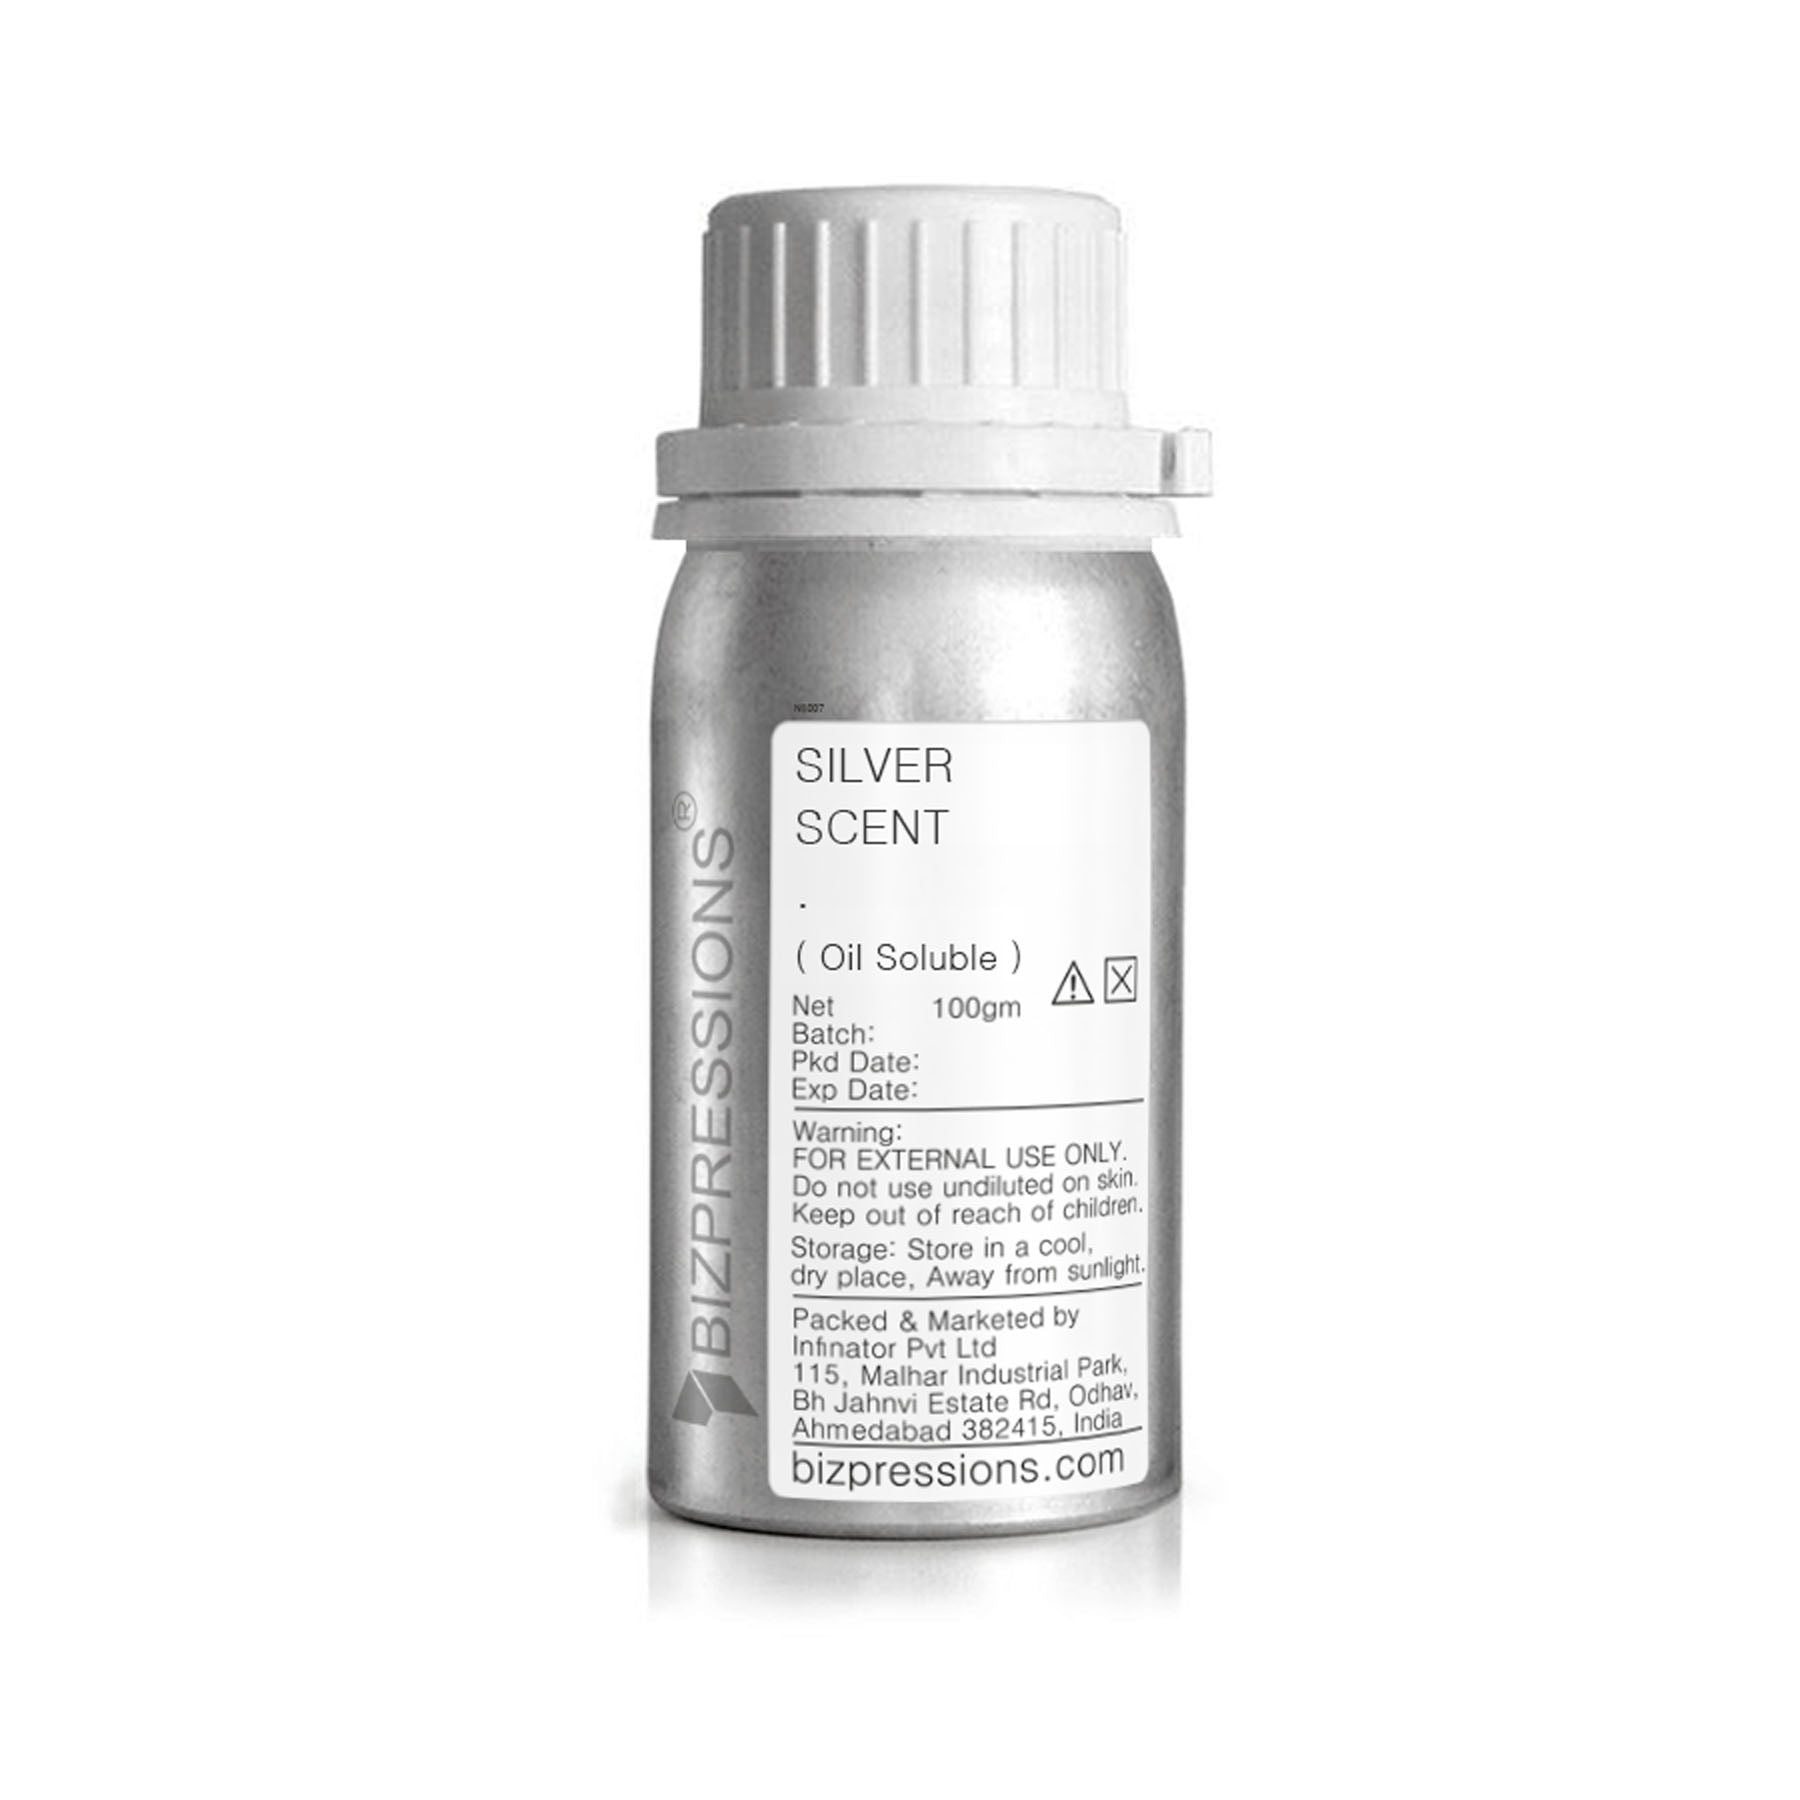 SILVER SCENT - Fragrance ( Oil Soluble )